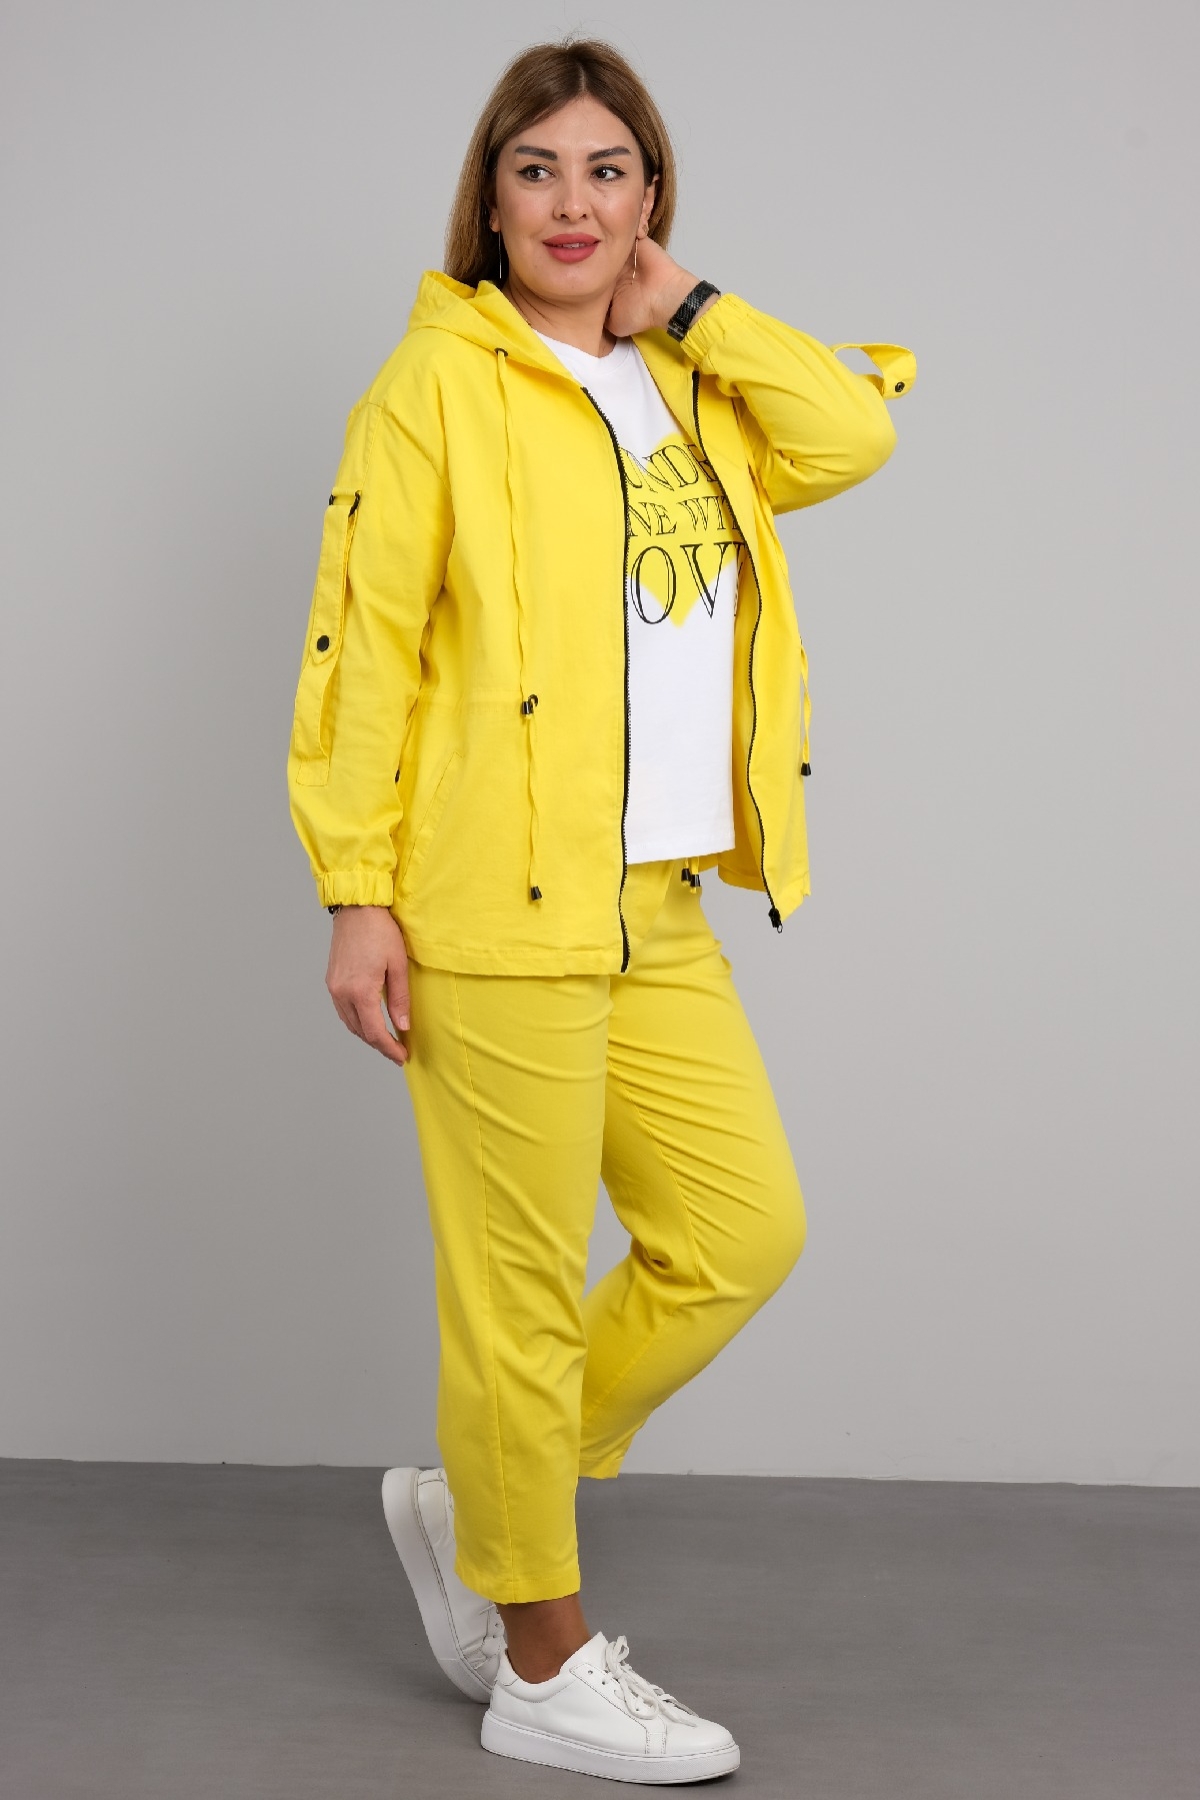 Women's 3 Piece Suits-Yellow